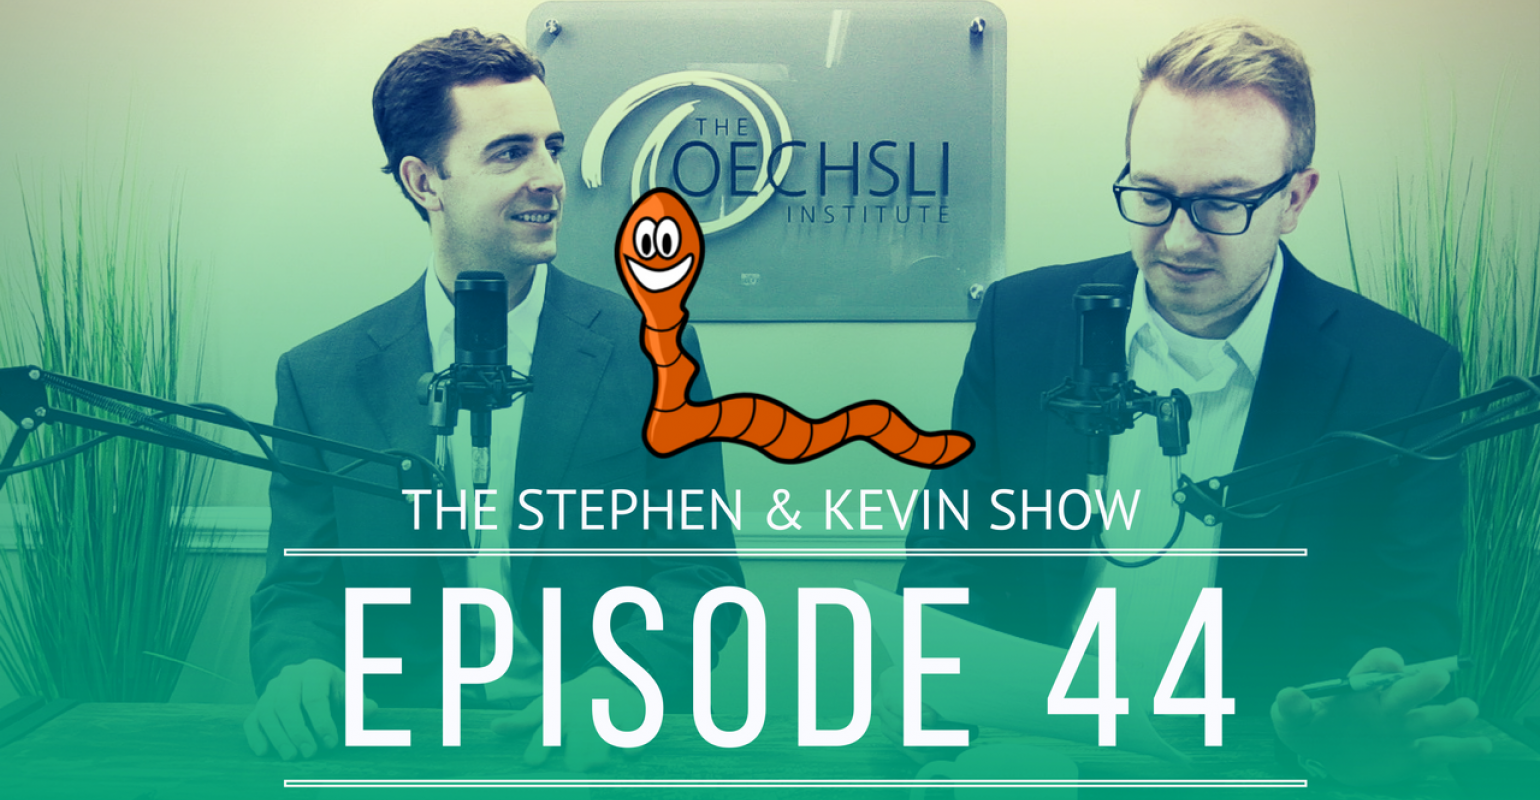 Stephen and Kevin Show episode 44